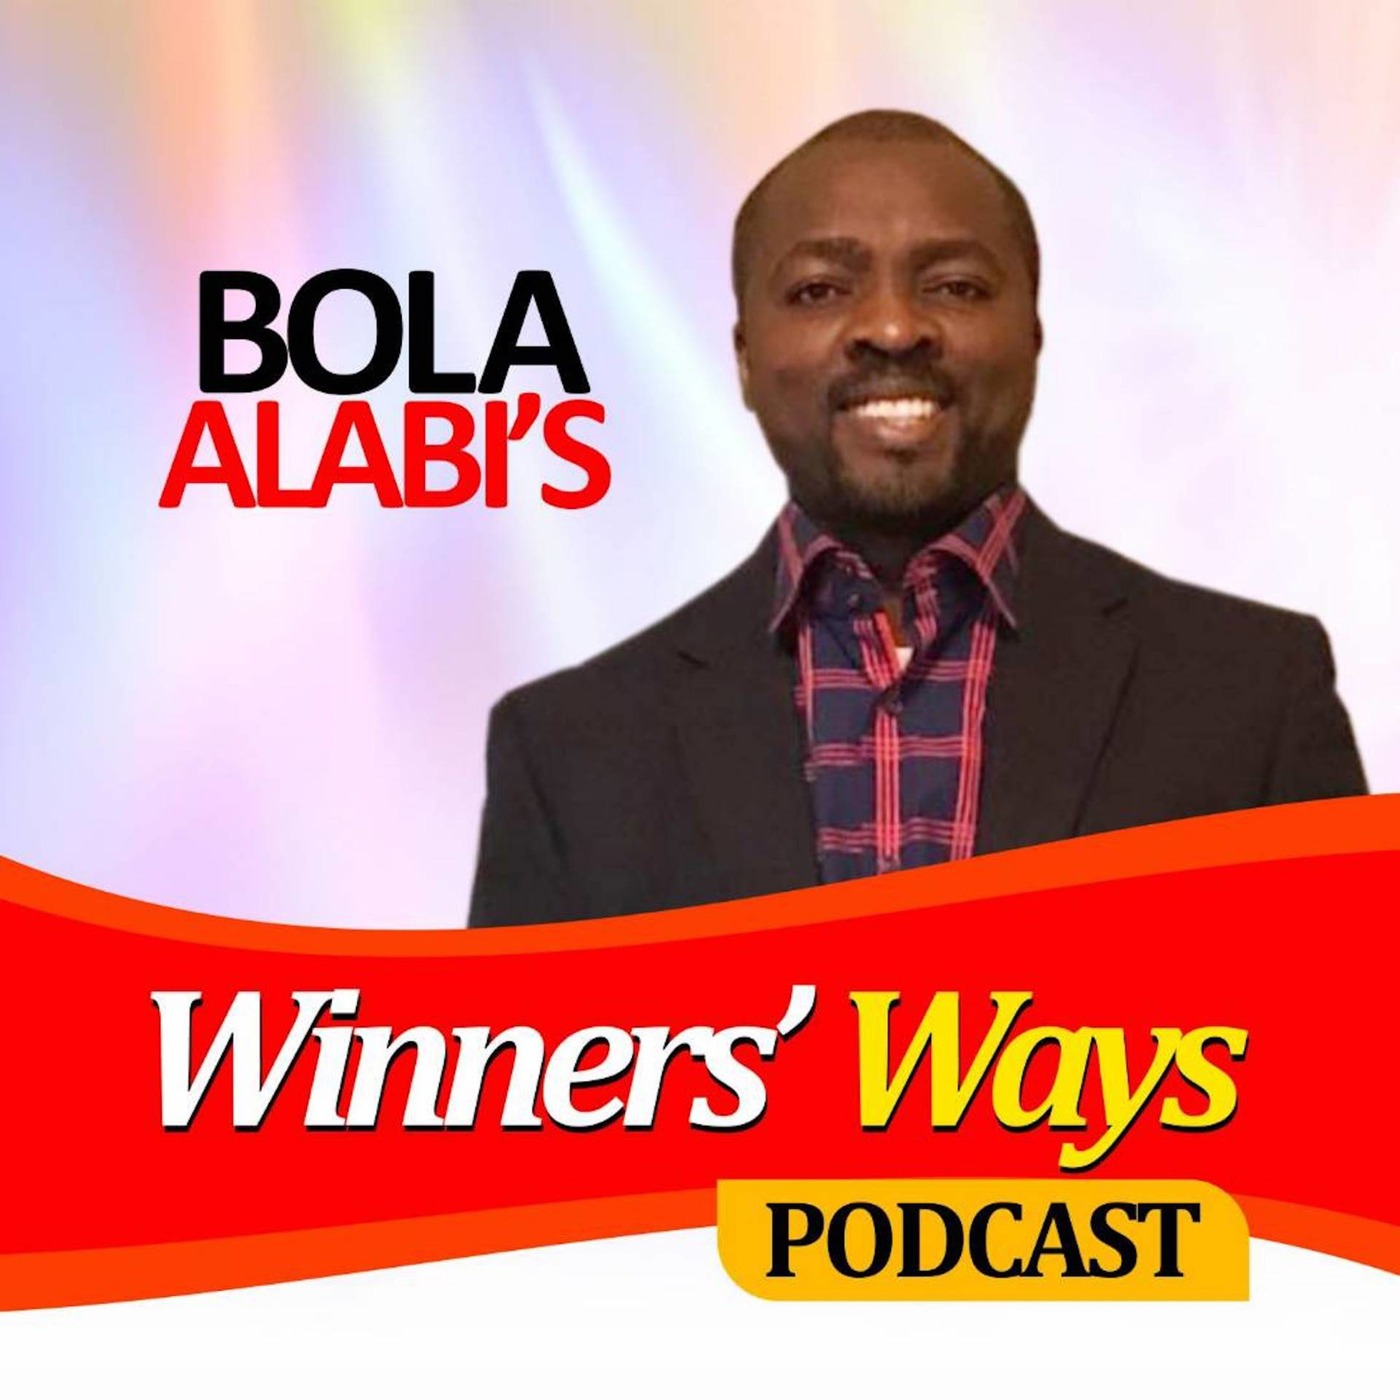 96: Planning Your Next Career Move with Tomi Ibirogba